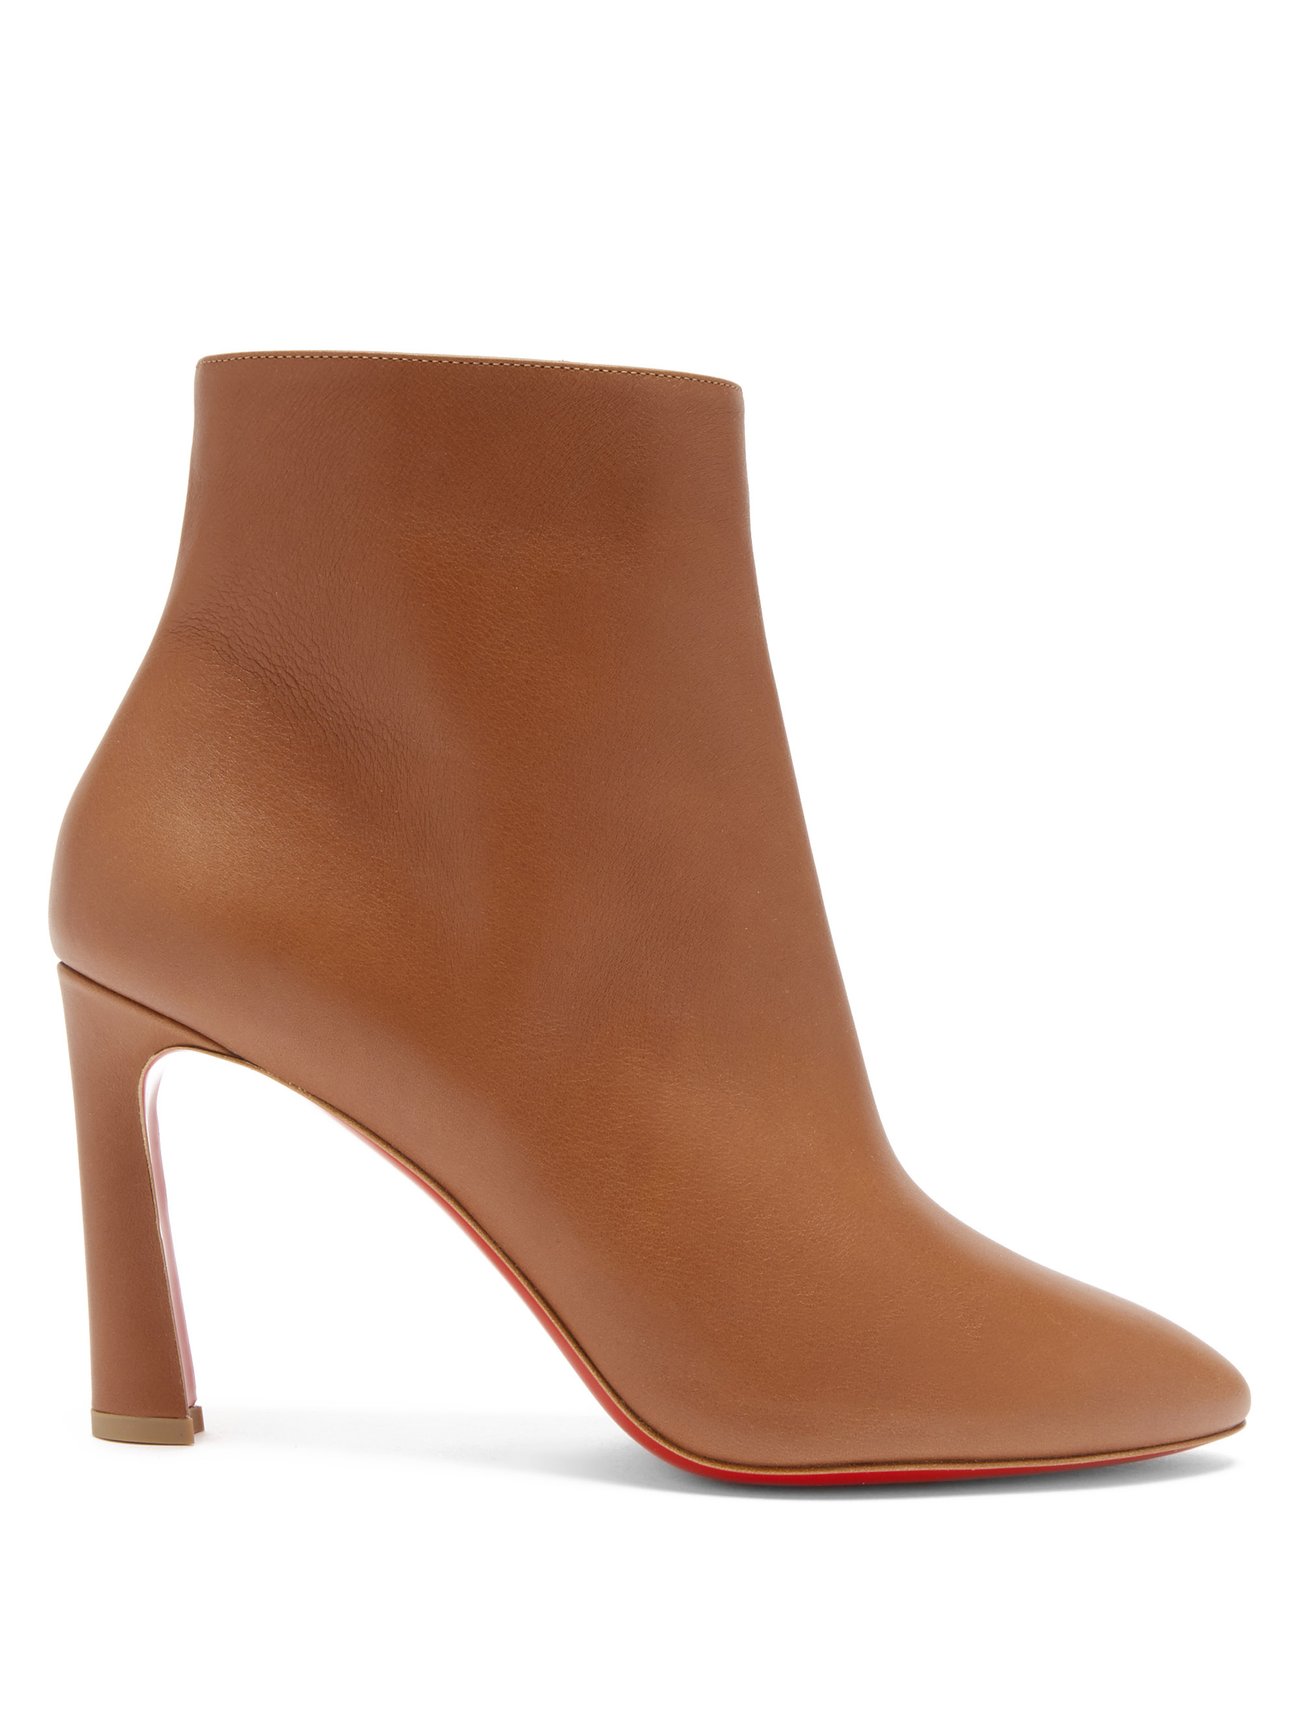 Eleonor 85 leather ankle boots